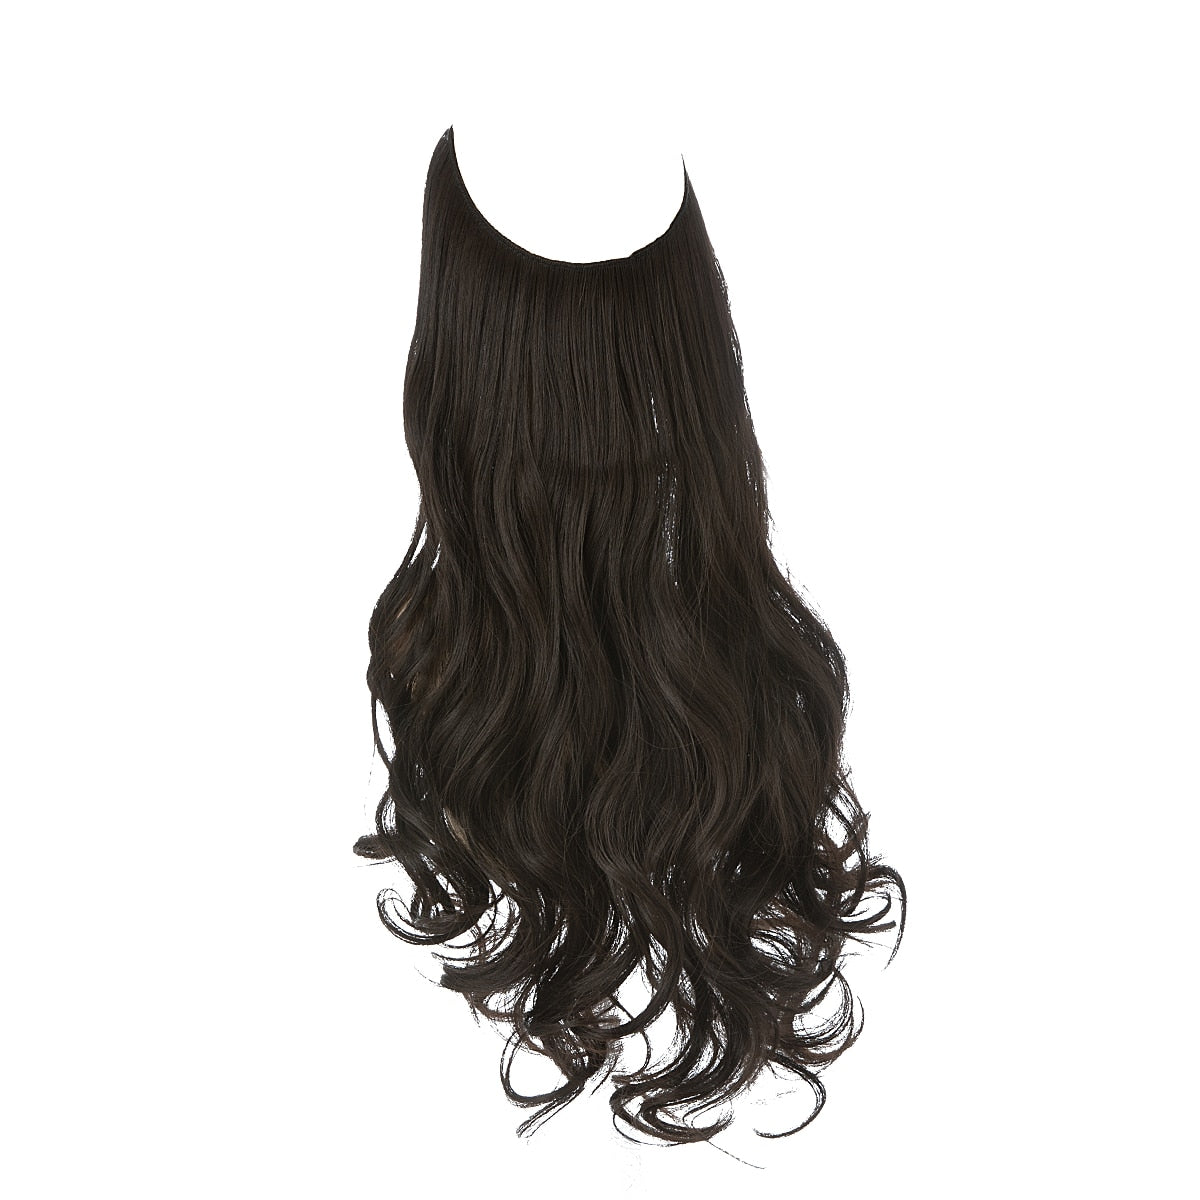 TEEK - Invisible Synth No Clip No Comb Wave Hair Extensions | Dark Varieties HAIR theteekdotcom Black Brown 14inches 